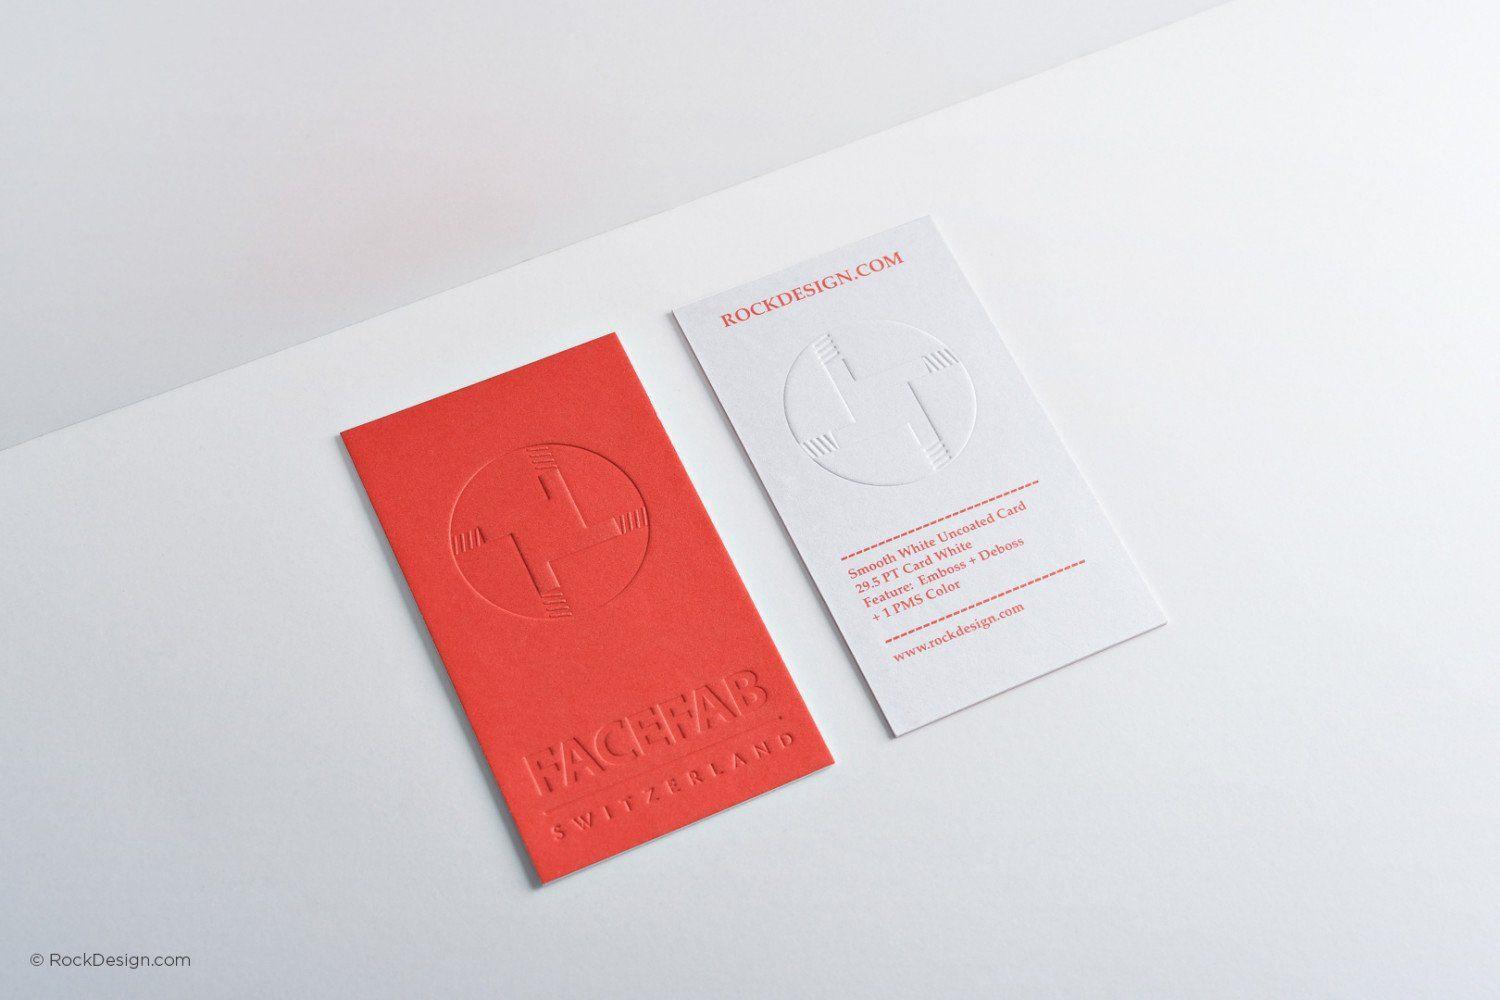 Red and White Business Logo - FREE Two sided business card templates | RockDesign.com